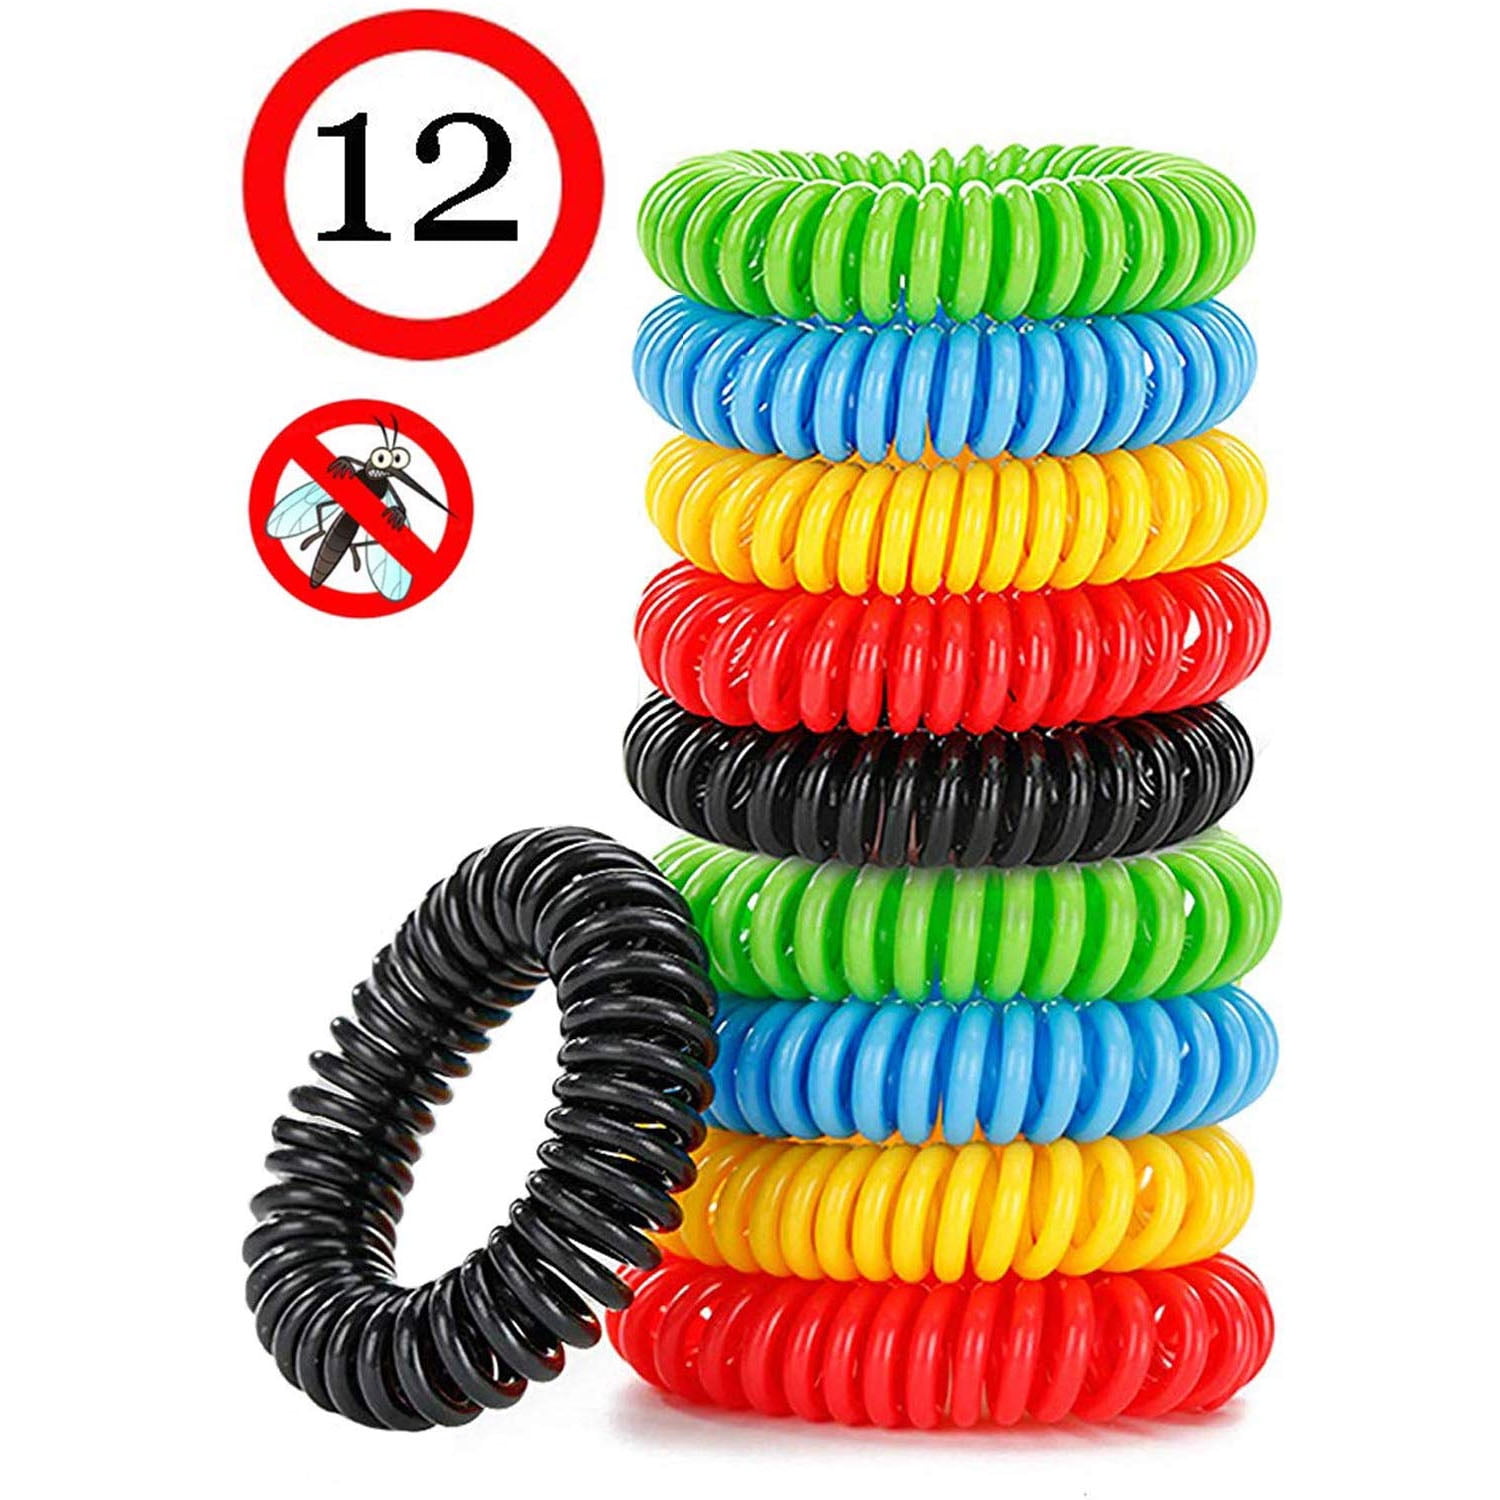 Mosquito Repellent Bracelet Anti Mosquito Bracelet Anti Mosquito Repellent Bracelets with Natural Material for Children and Adults 63679c27 9b03 403f 98d8 69322dee4657 1.59a63a98e557d787078507a86404adaa